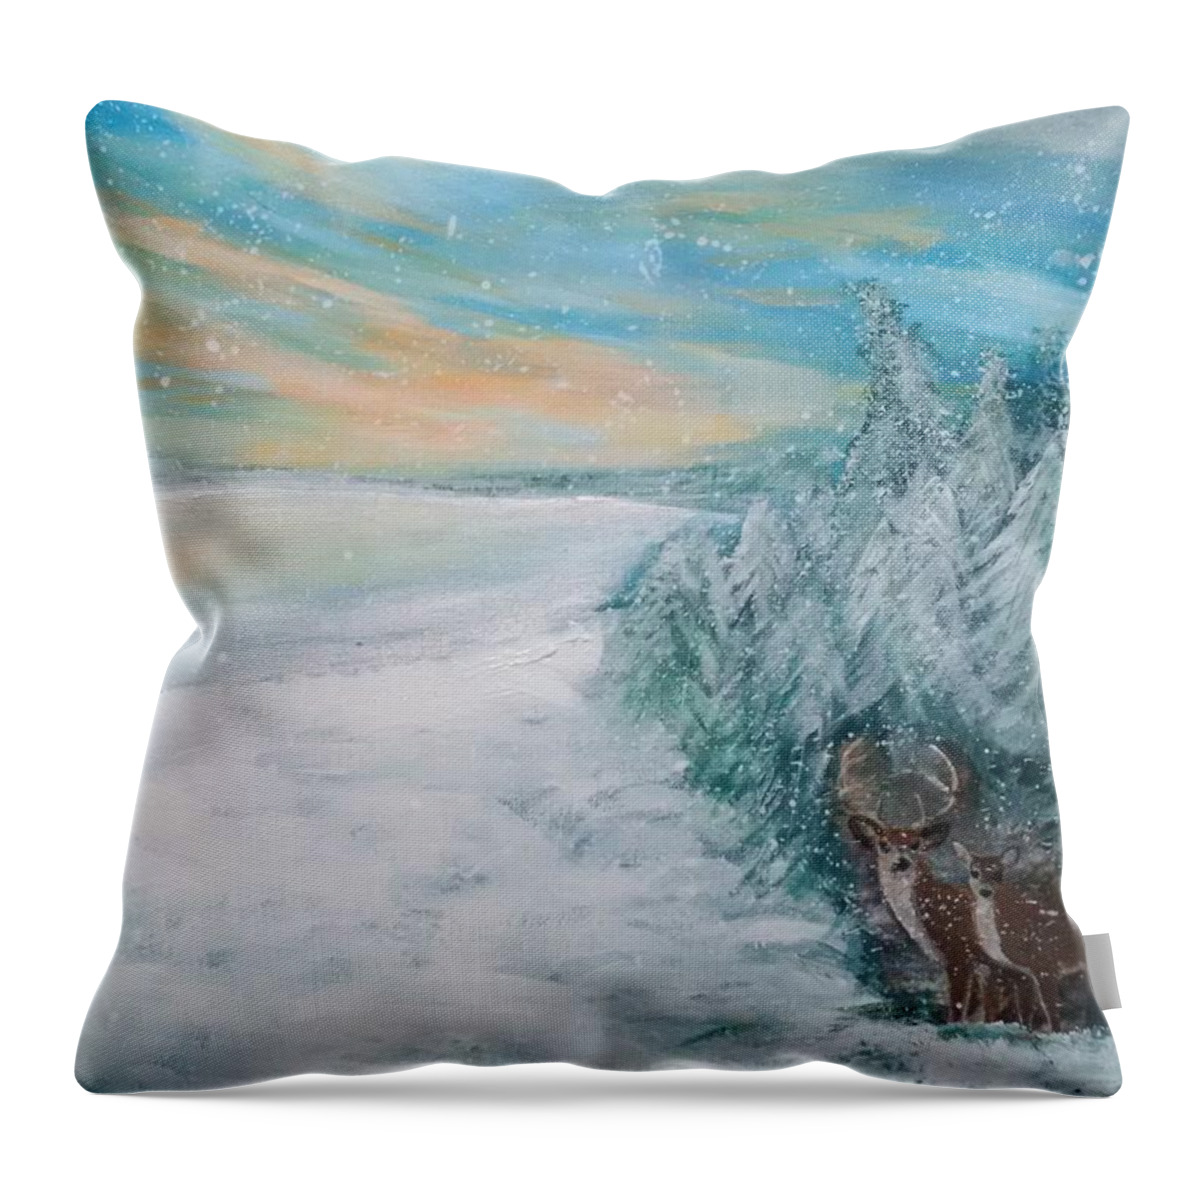 Inspiration Came From A Recent Weekend Up In Northern Ontario Where 2 Days Prior The Temps Were Almost T-shirt Weather Throw Pillow featuring the painting Shelter from the Snow by Lynne McQueen